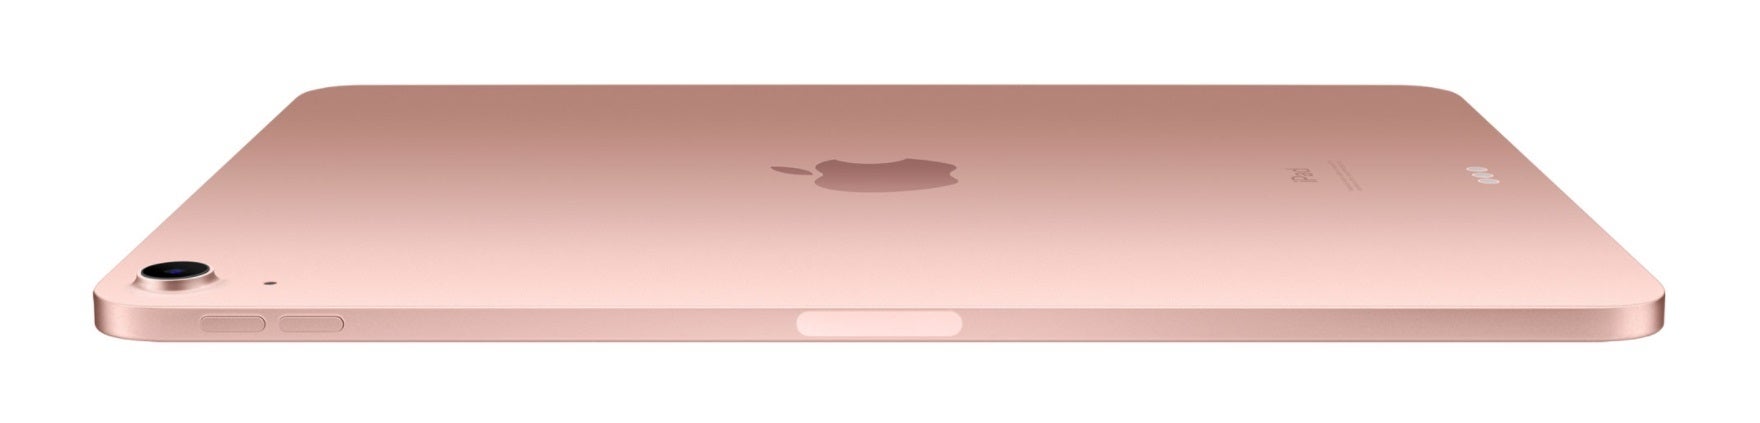 iPad Air 4 in Rose Gold - Apple iPad Air 4: all the new colors